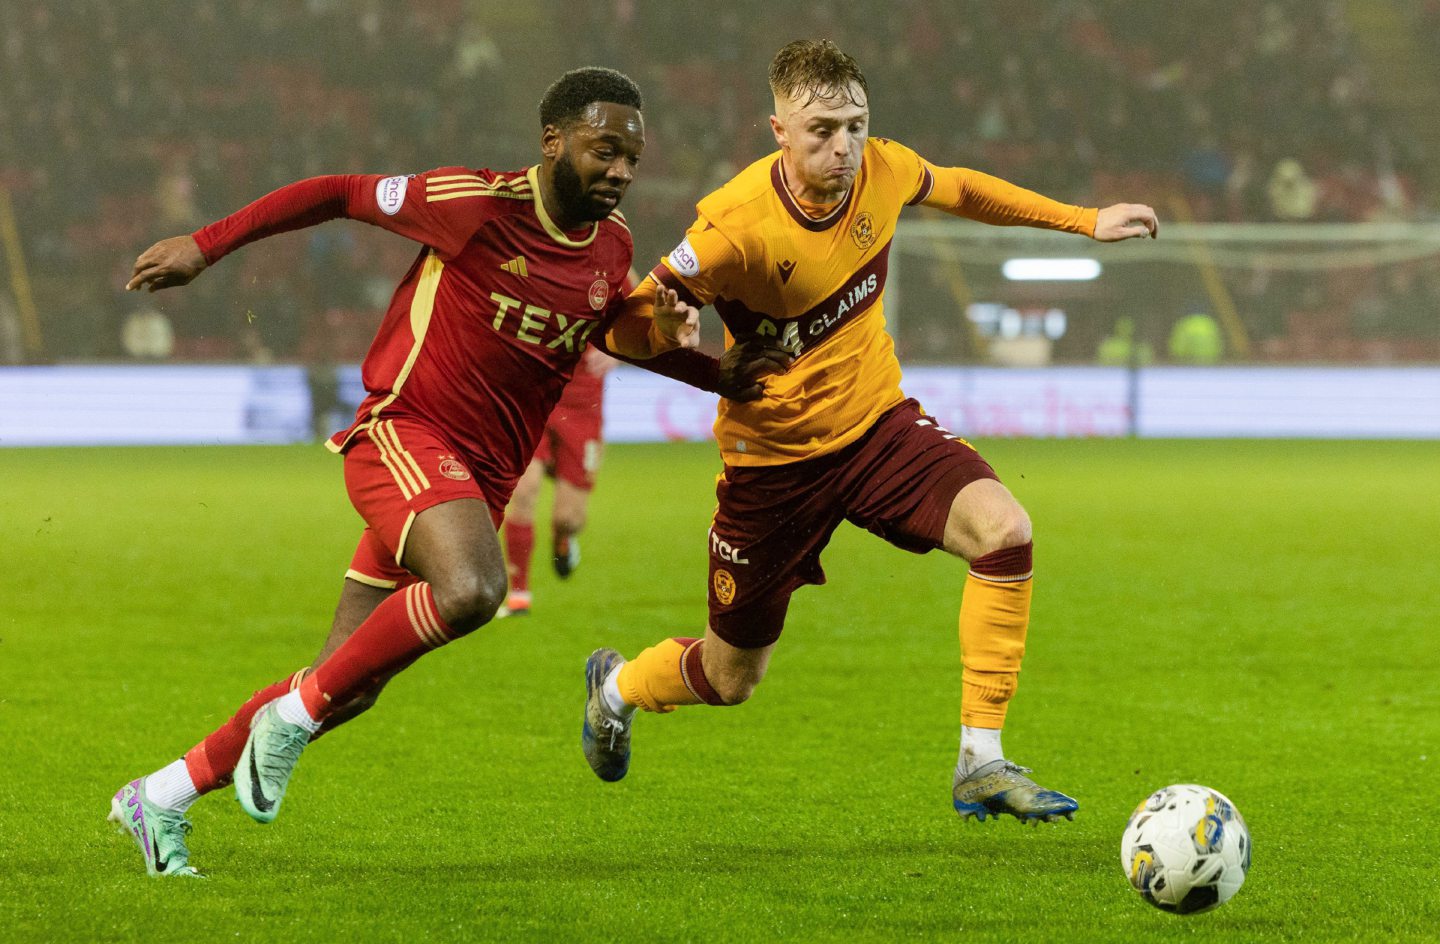 Aberdeen's Shayden Morris and Motherwell's Georgie Gent during a Premiership clash at Pittodrie. Image: SNS 